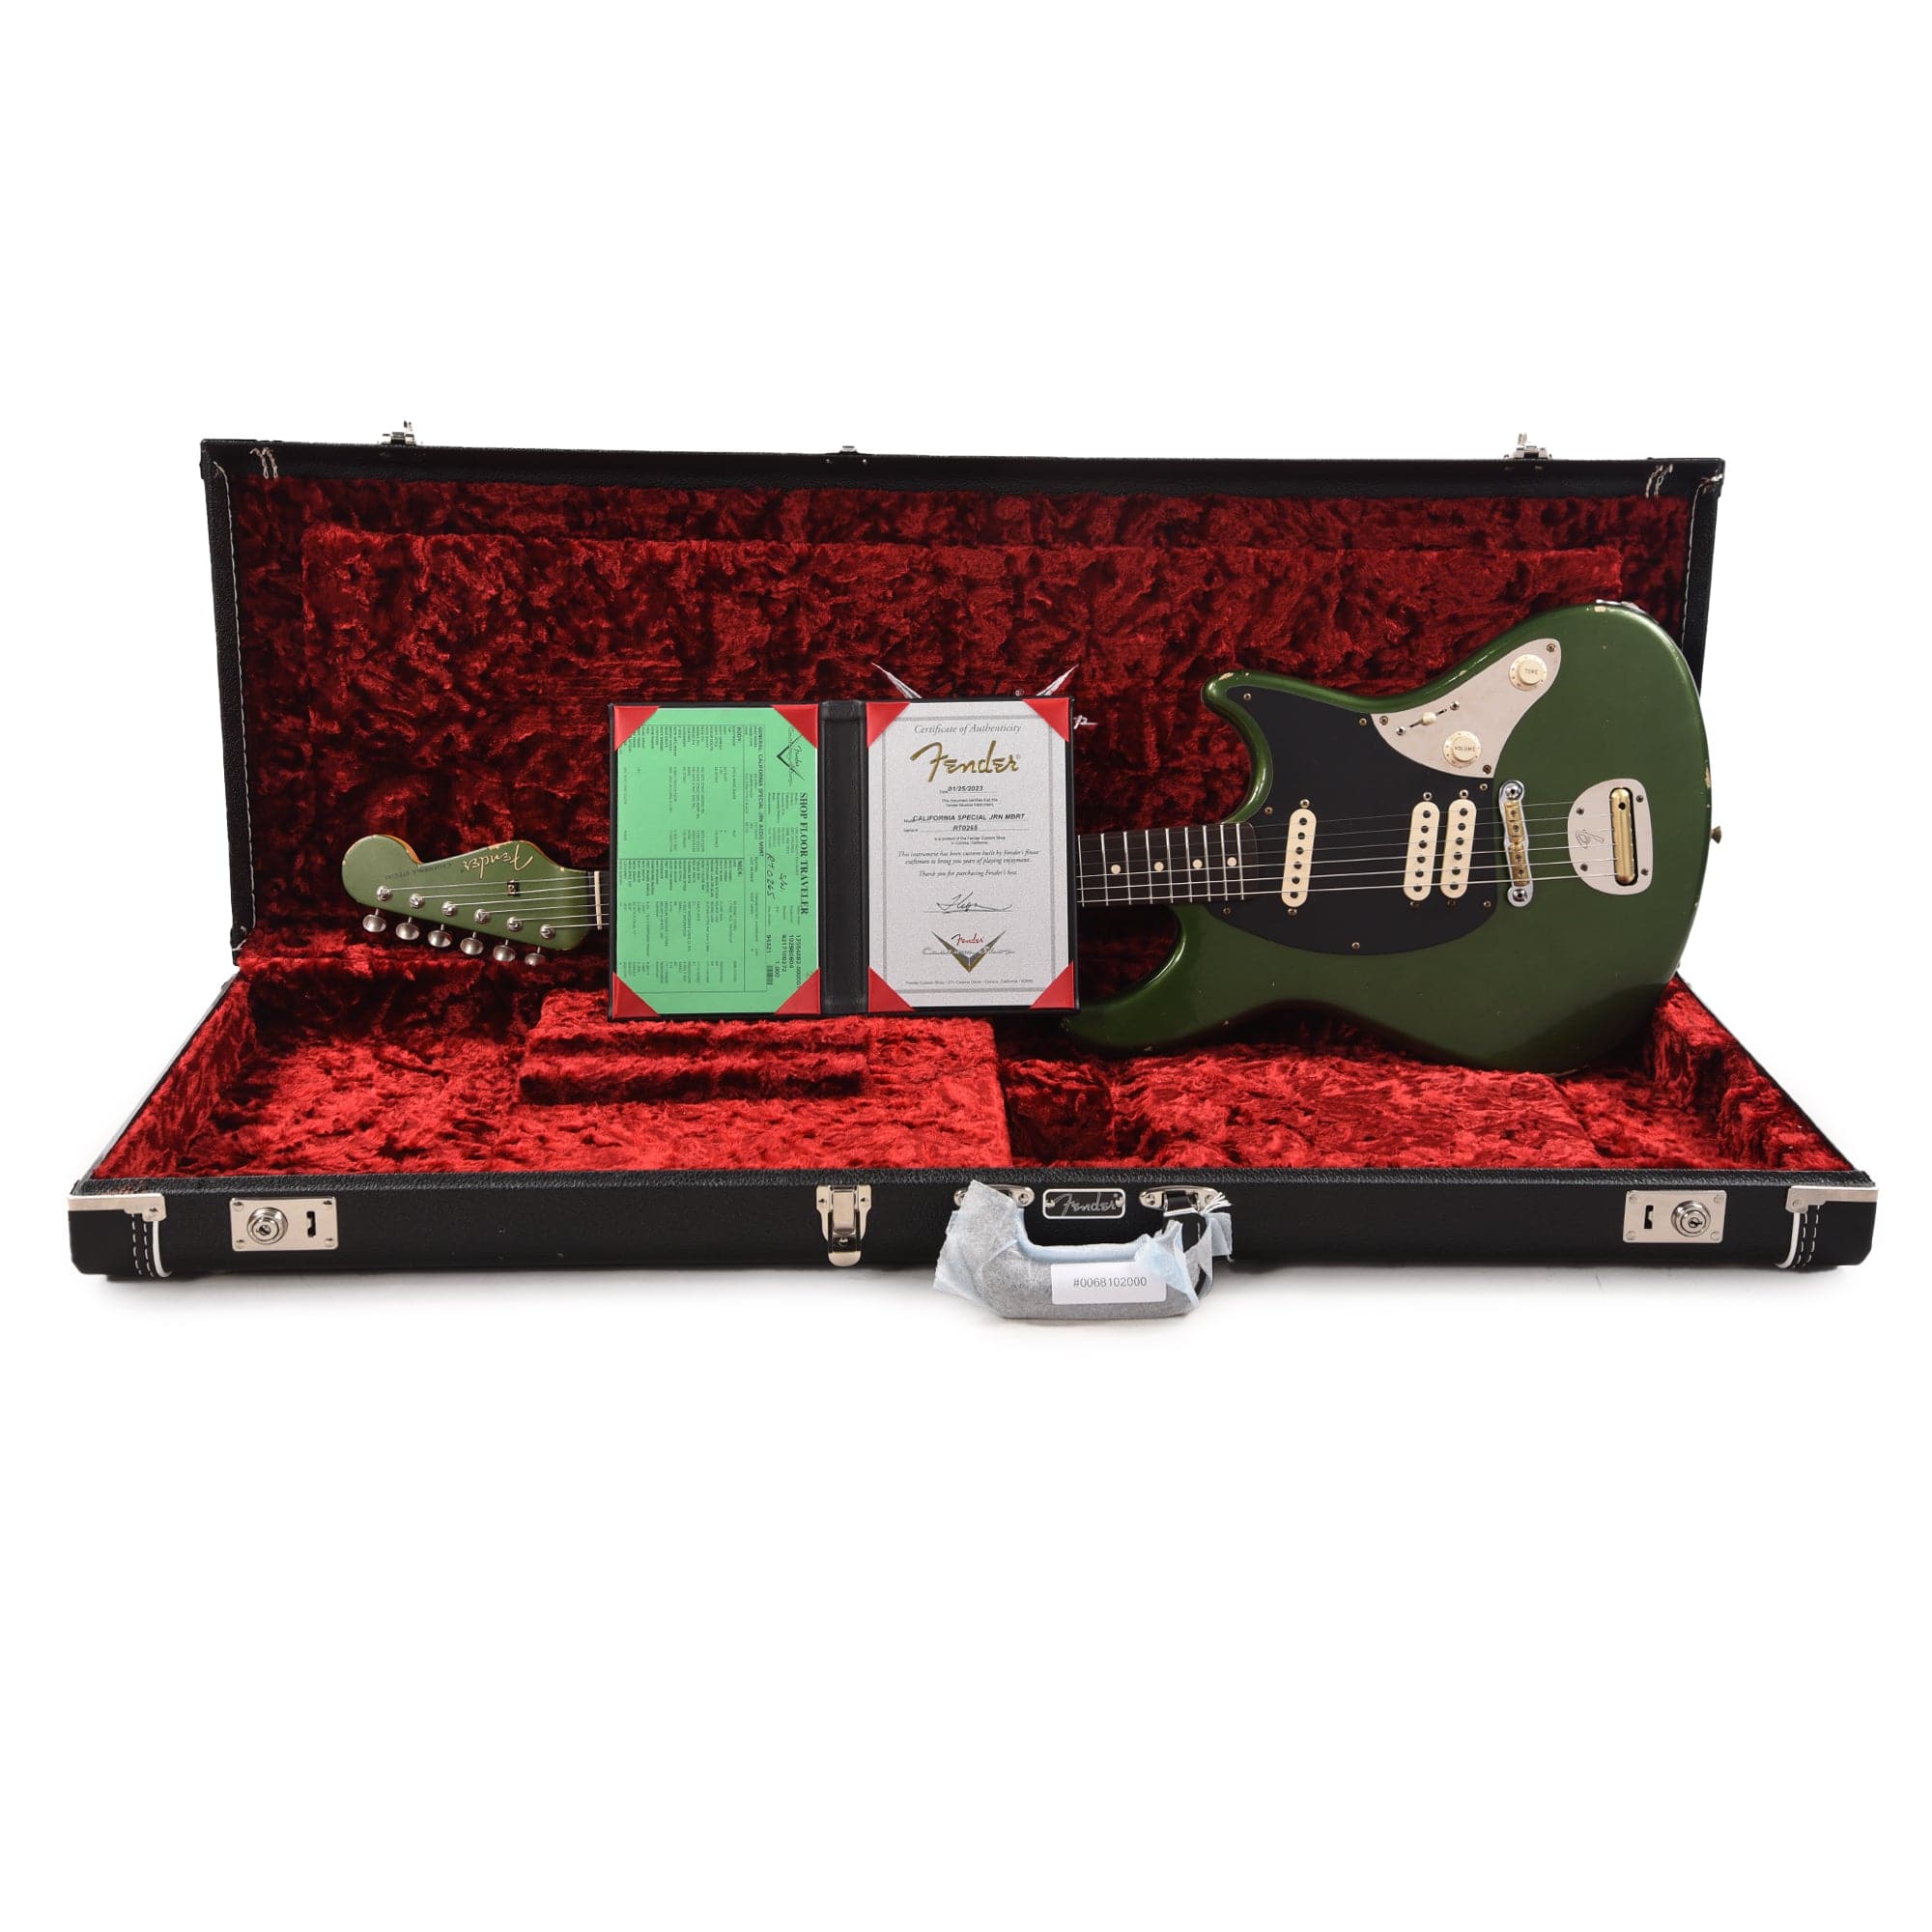 Fender Custom Shop California Special Journeyman Aged Cadillac Green Master Built by Ron Thorn Electric Guitars / Solid Body